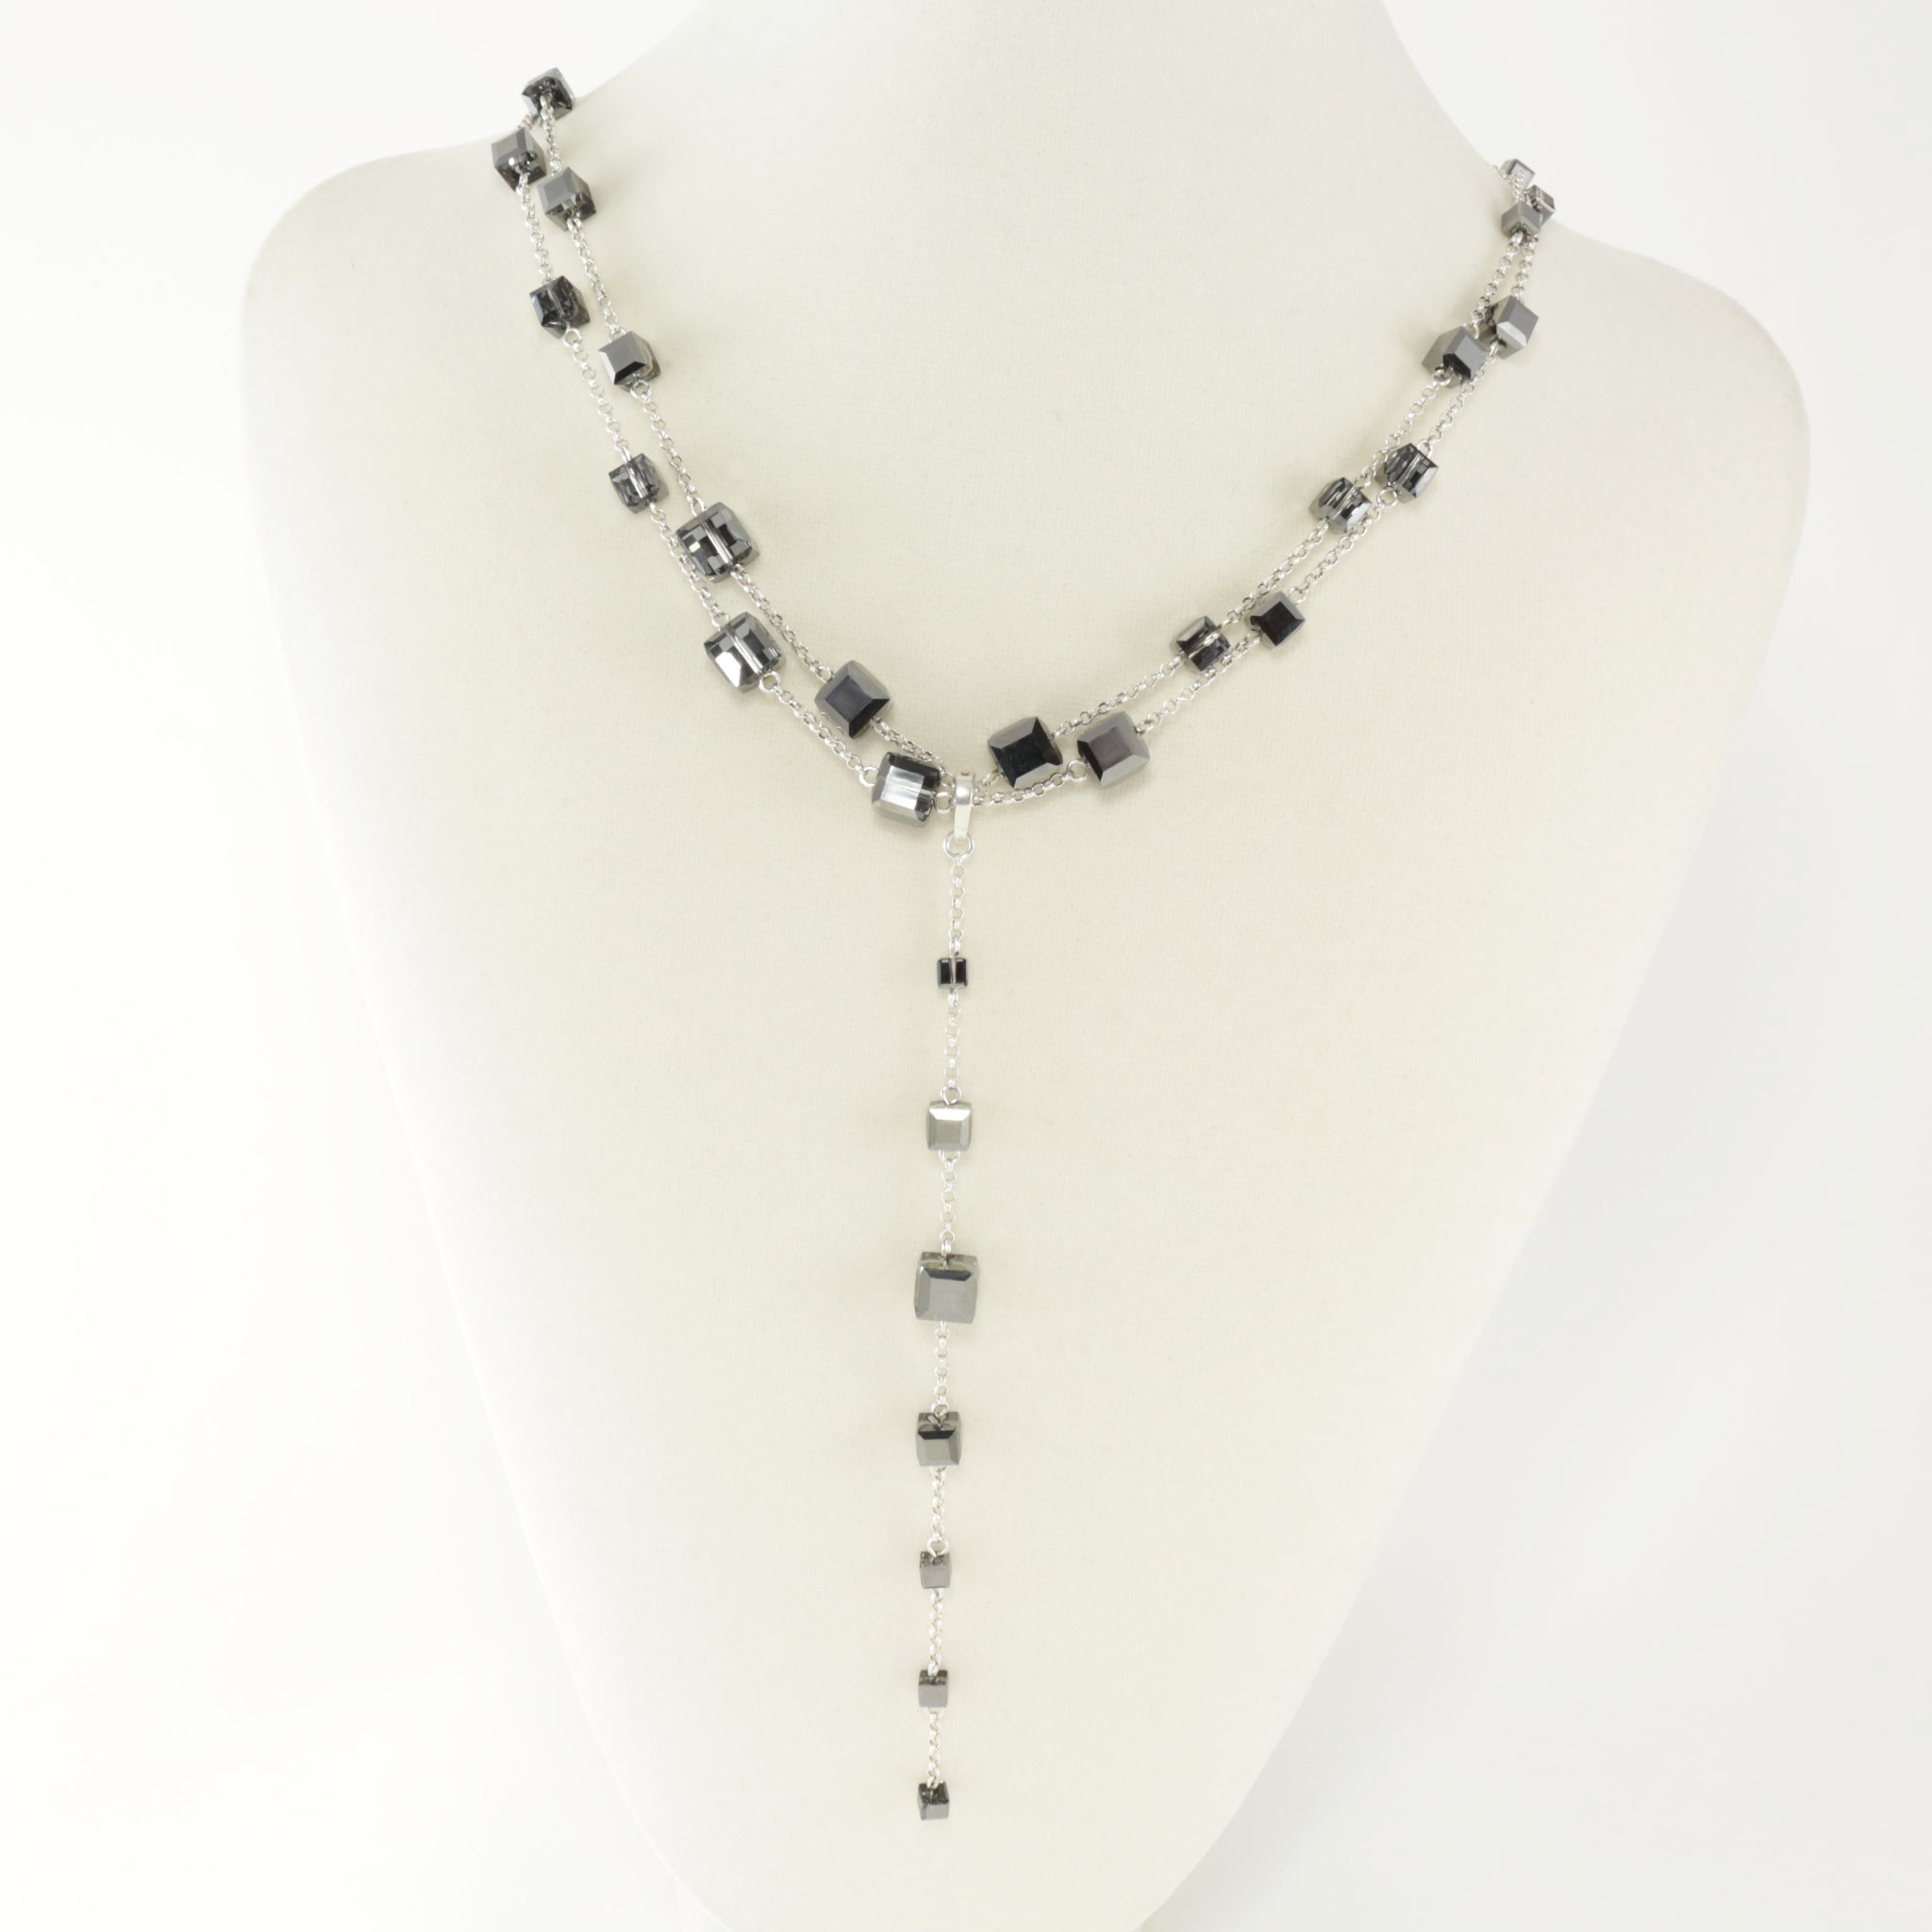 Windows Change-ABLE Necklace in Silver Black